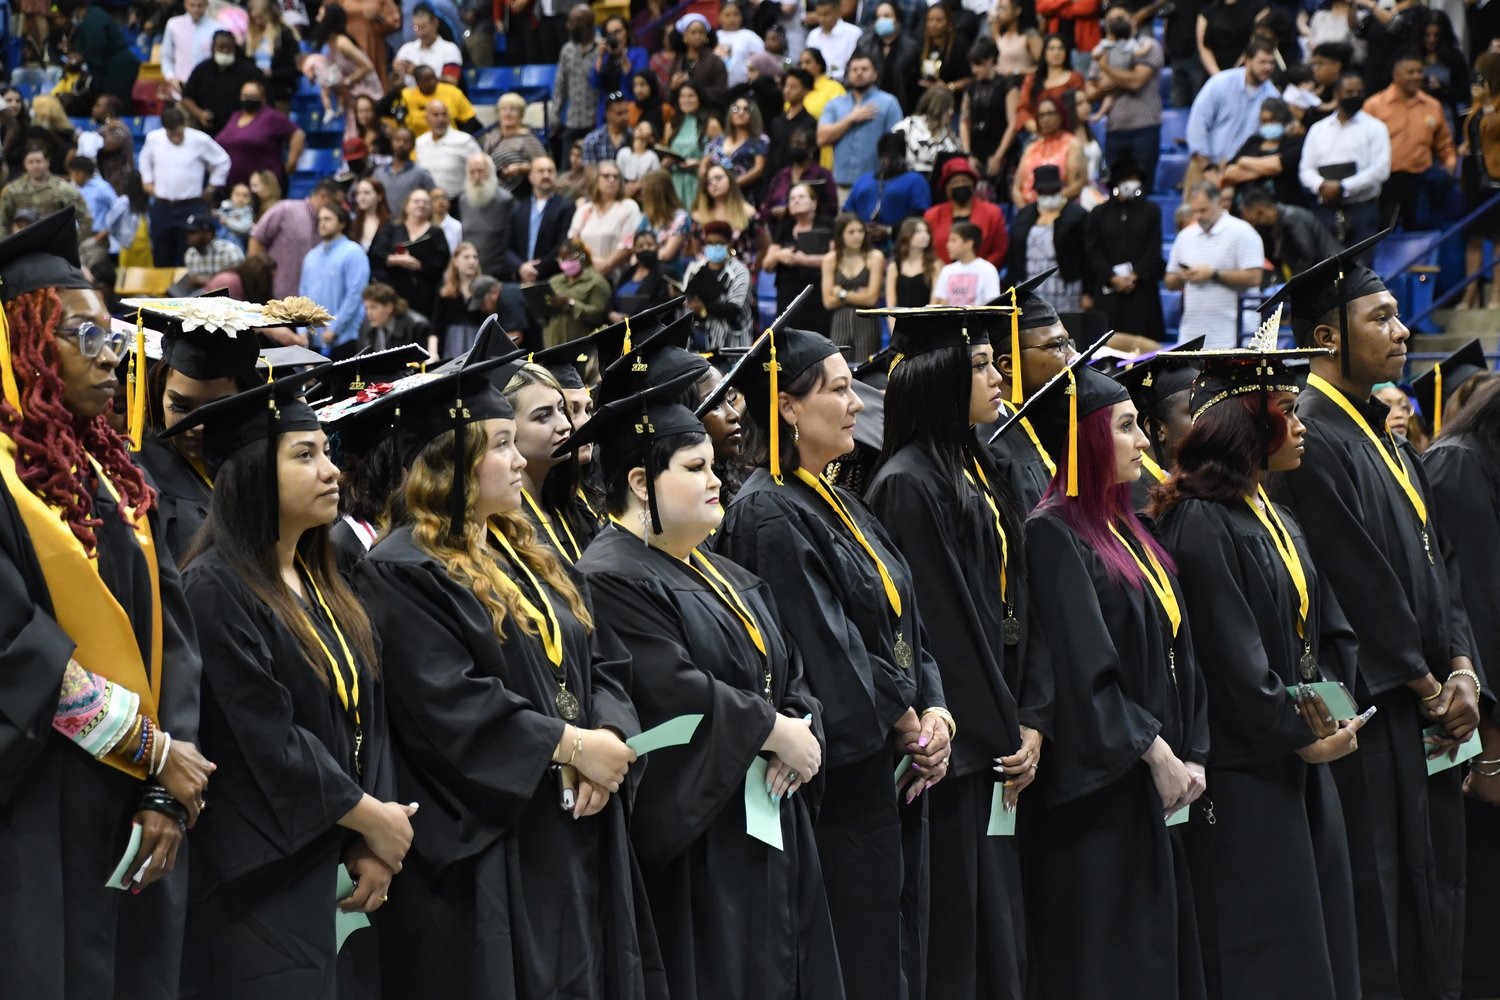 Fayetteville Technical Community College held two commencement ceremonies May 13 recognizing 1,897 graduates receiving 3,650 certificates, diplomas or associate degrees from 257 curriculum programs.